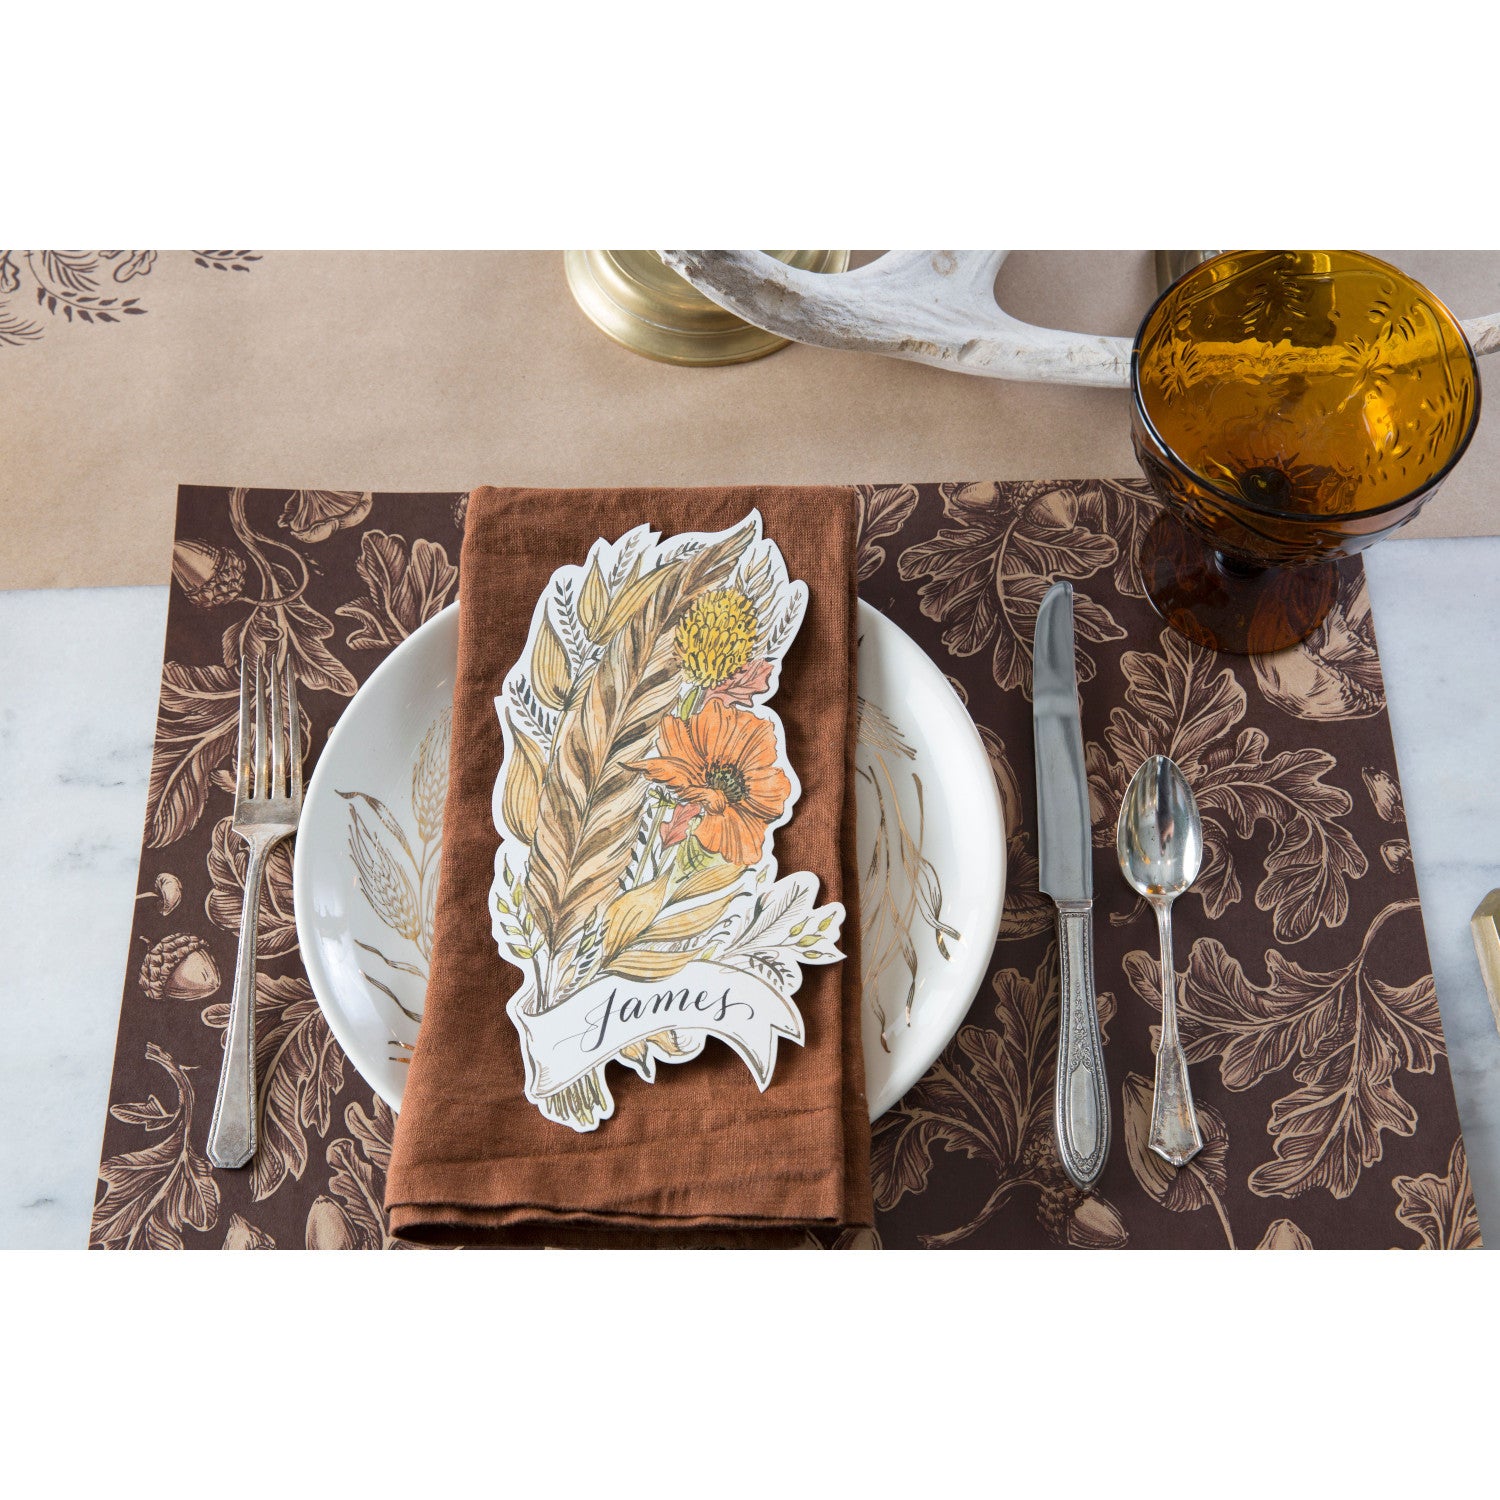 The Into The Woods Placemat under an elegant place setting, from above.